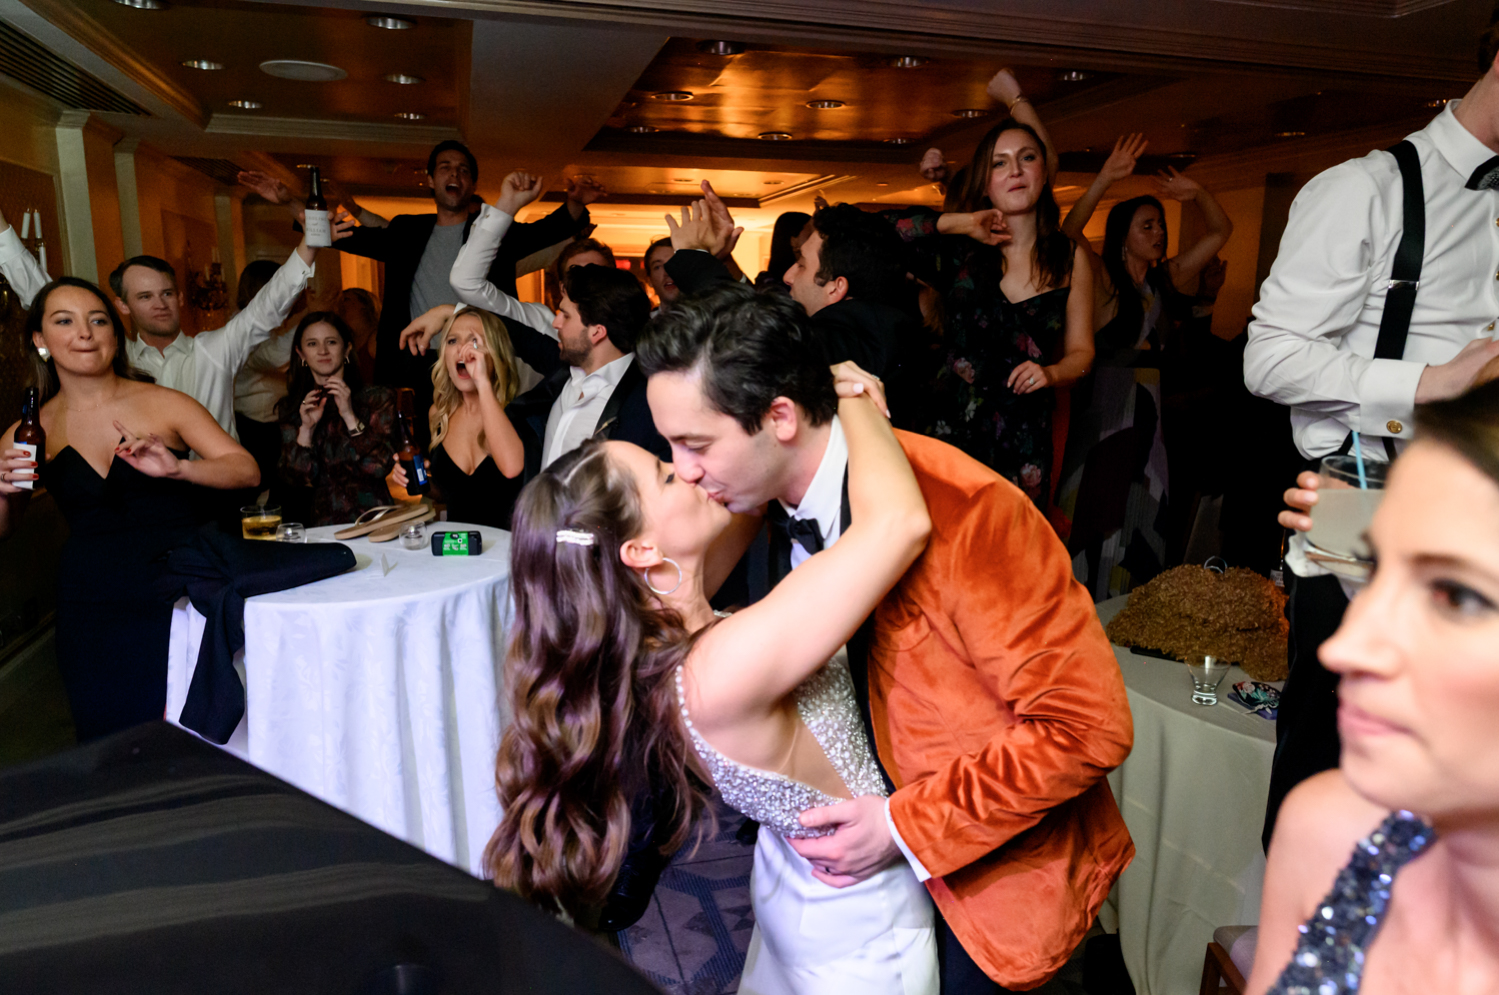 The bride and groom kiss as their guests at the after party cheer.